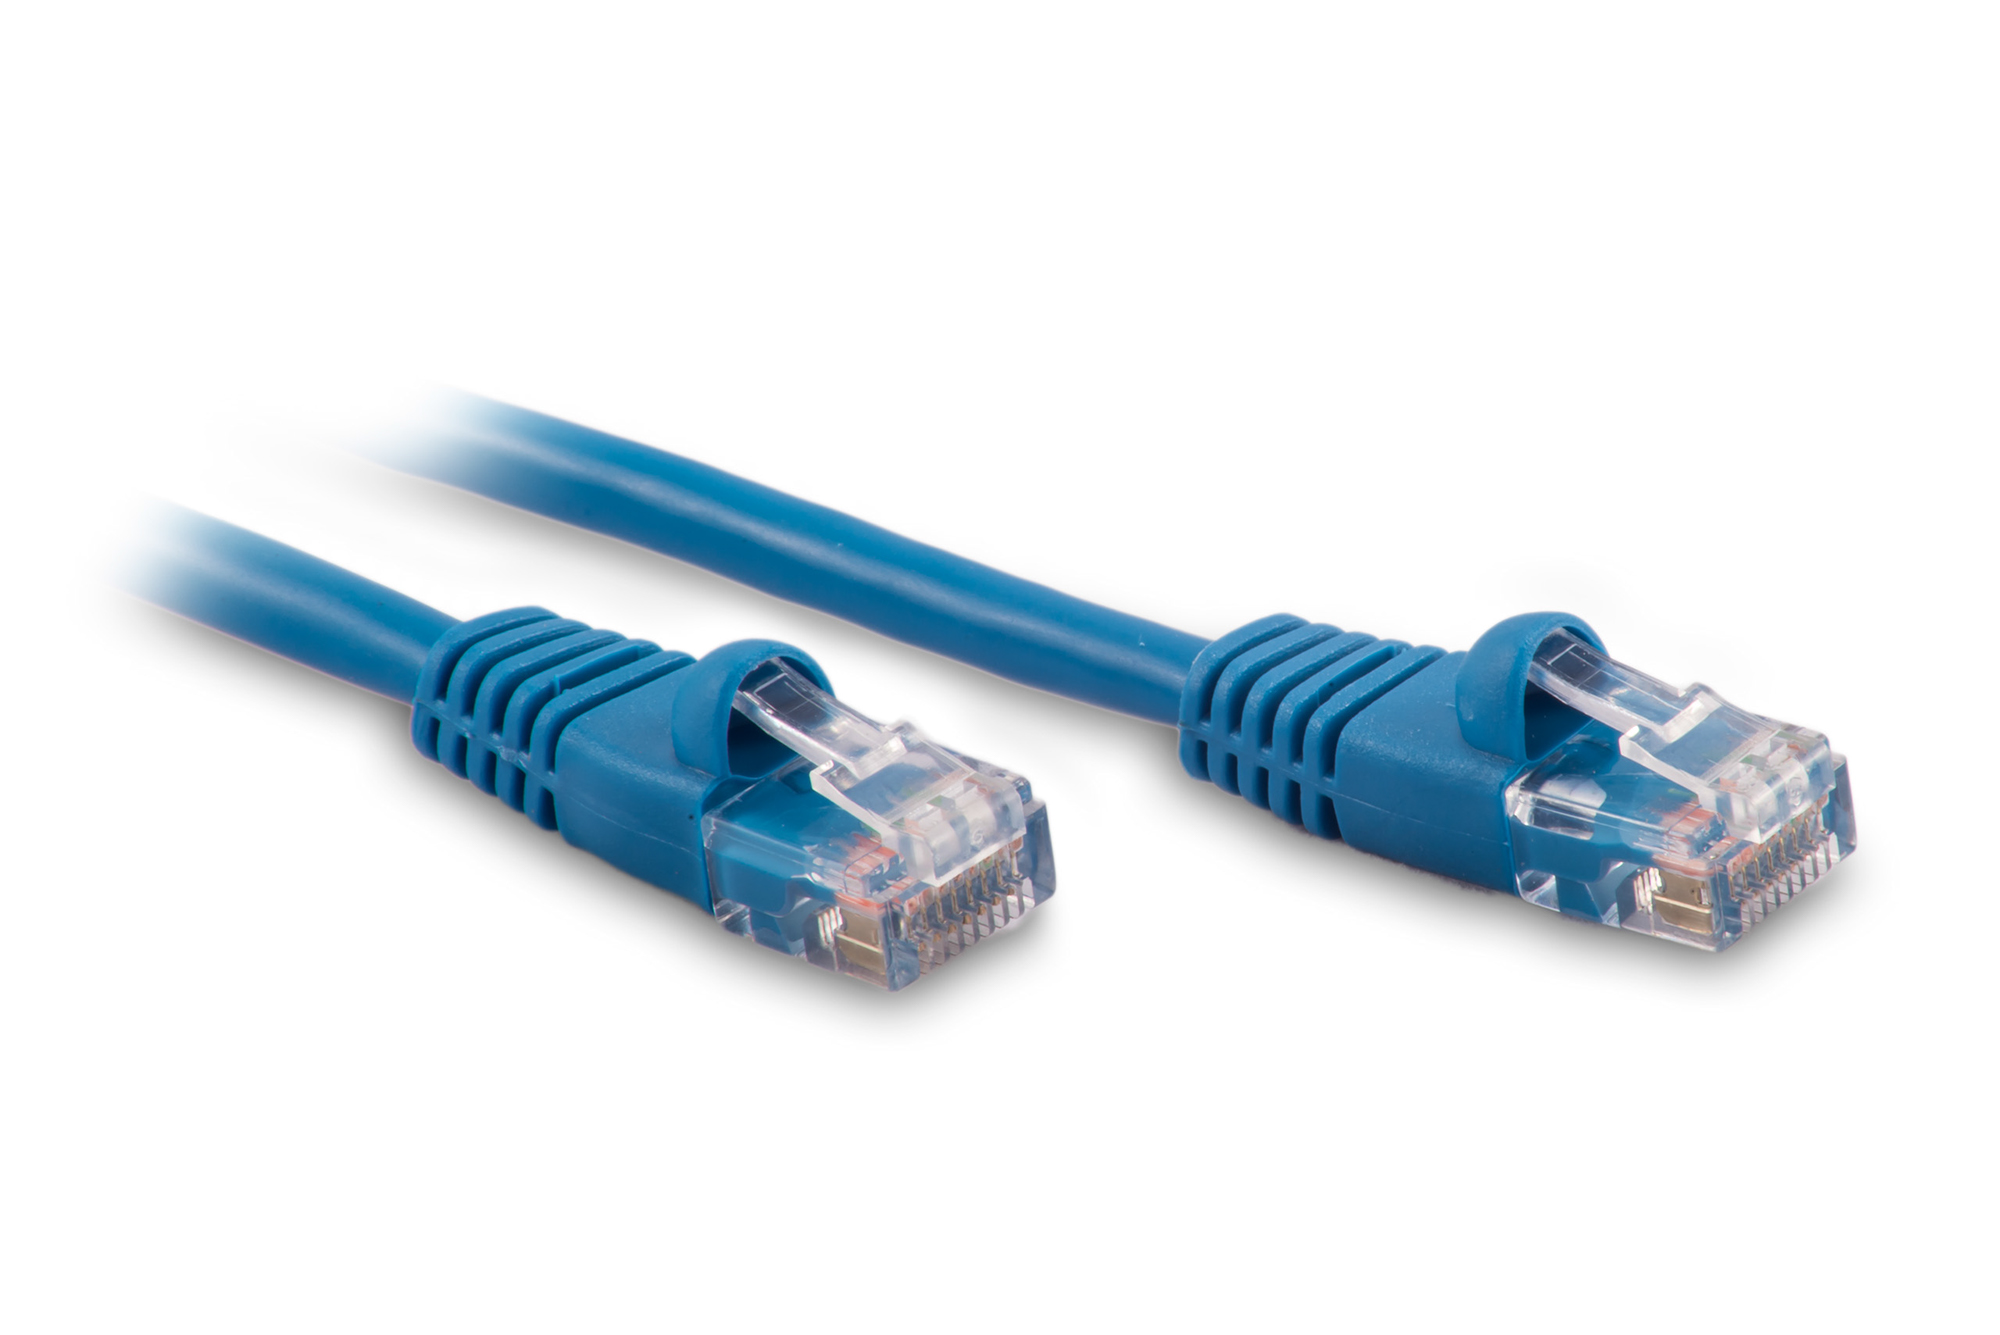 40ft Cat6 Ethernet Patch Cable - Blue Color - Snagless Boot